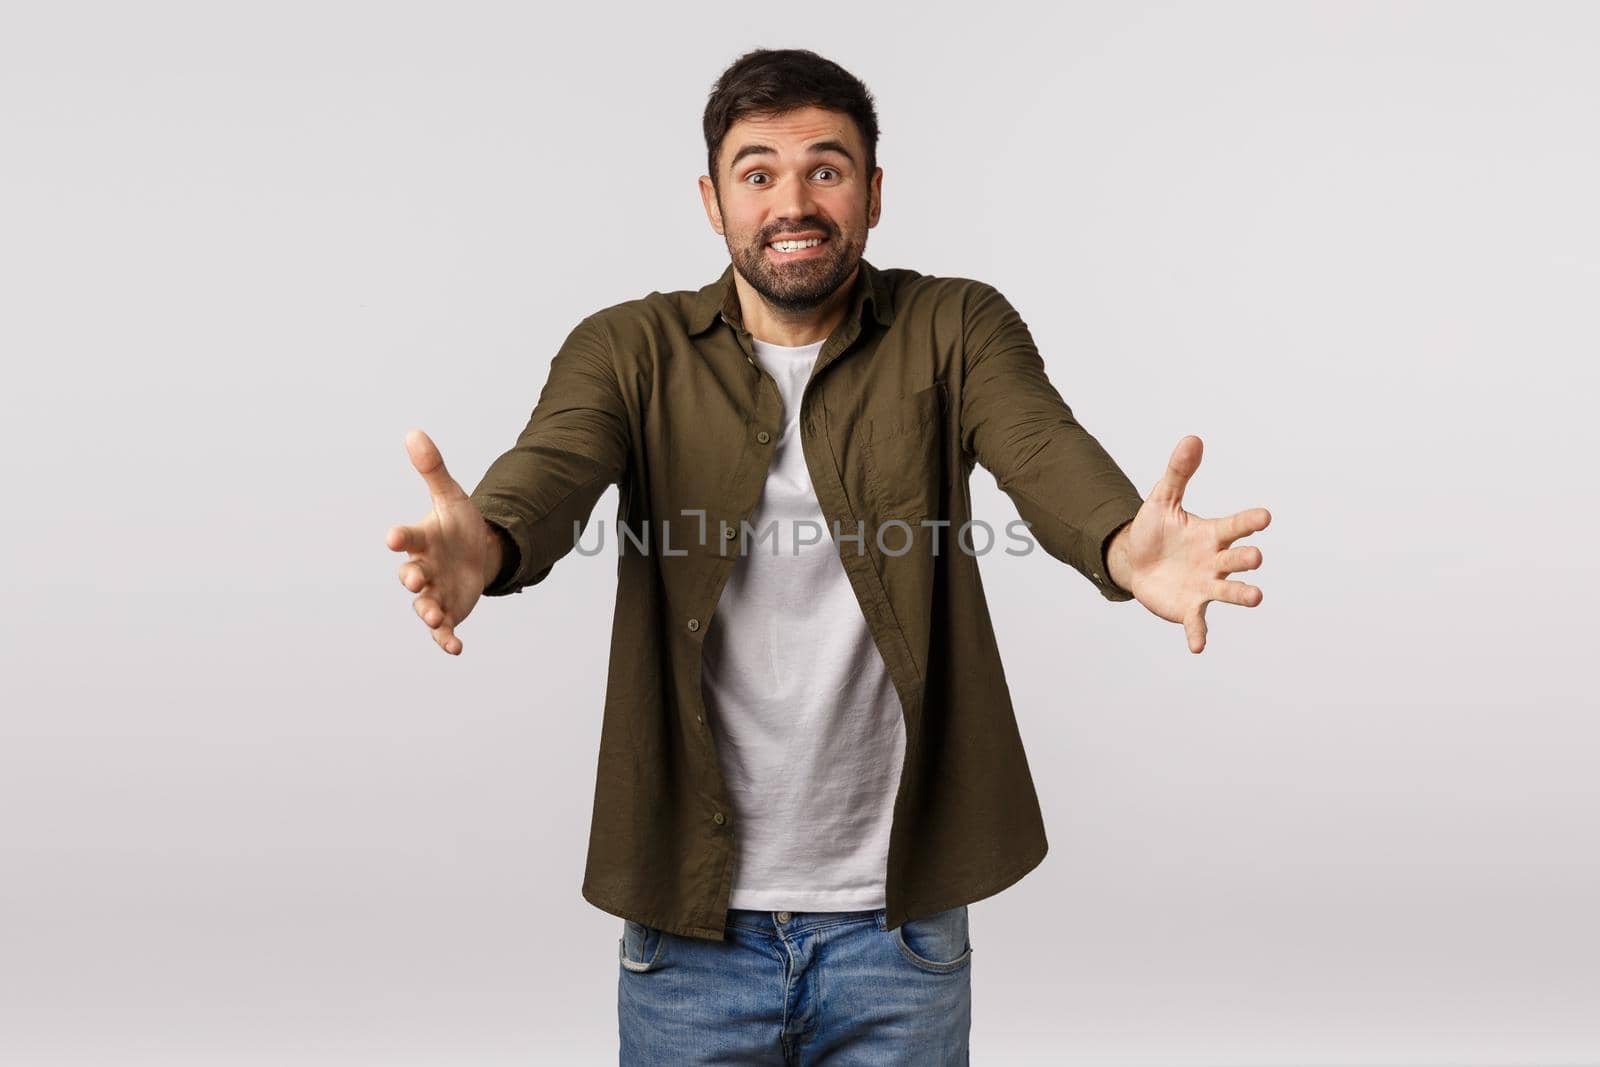 Lovely cheerful dad with beard in coat meeting his child in airport, spread hands sideways to cuddle someone, catch friend into his arms, smiling delighted, embracing loved one, white background.